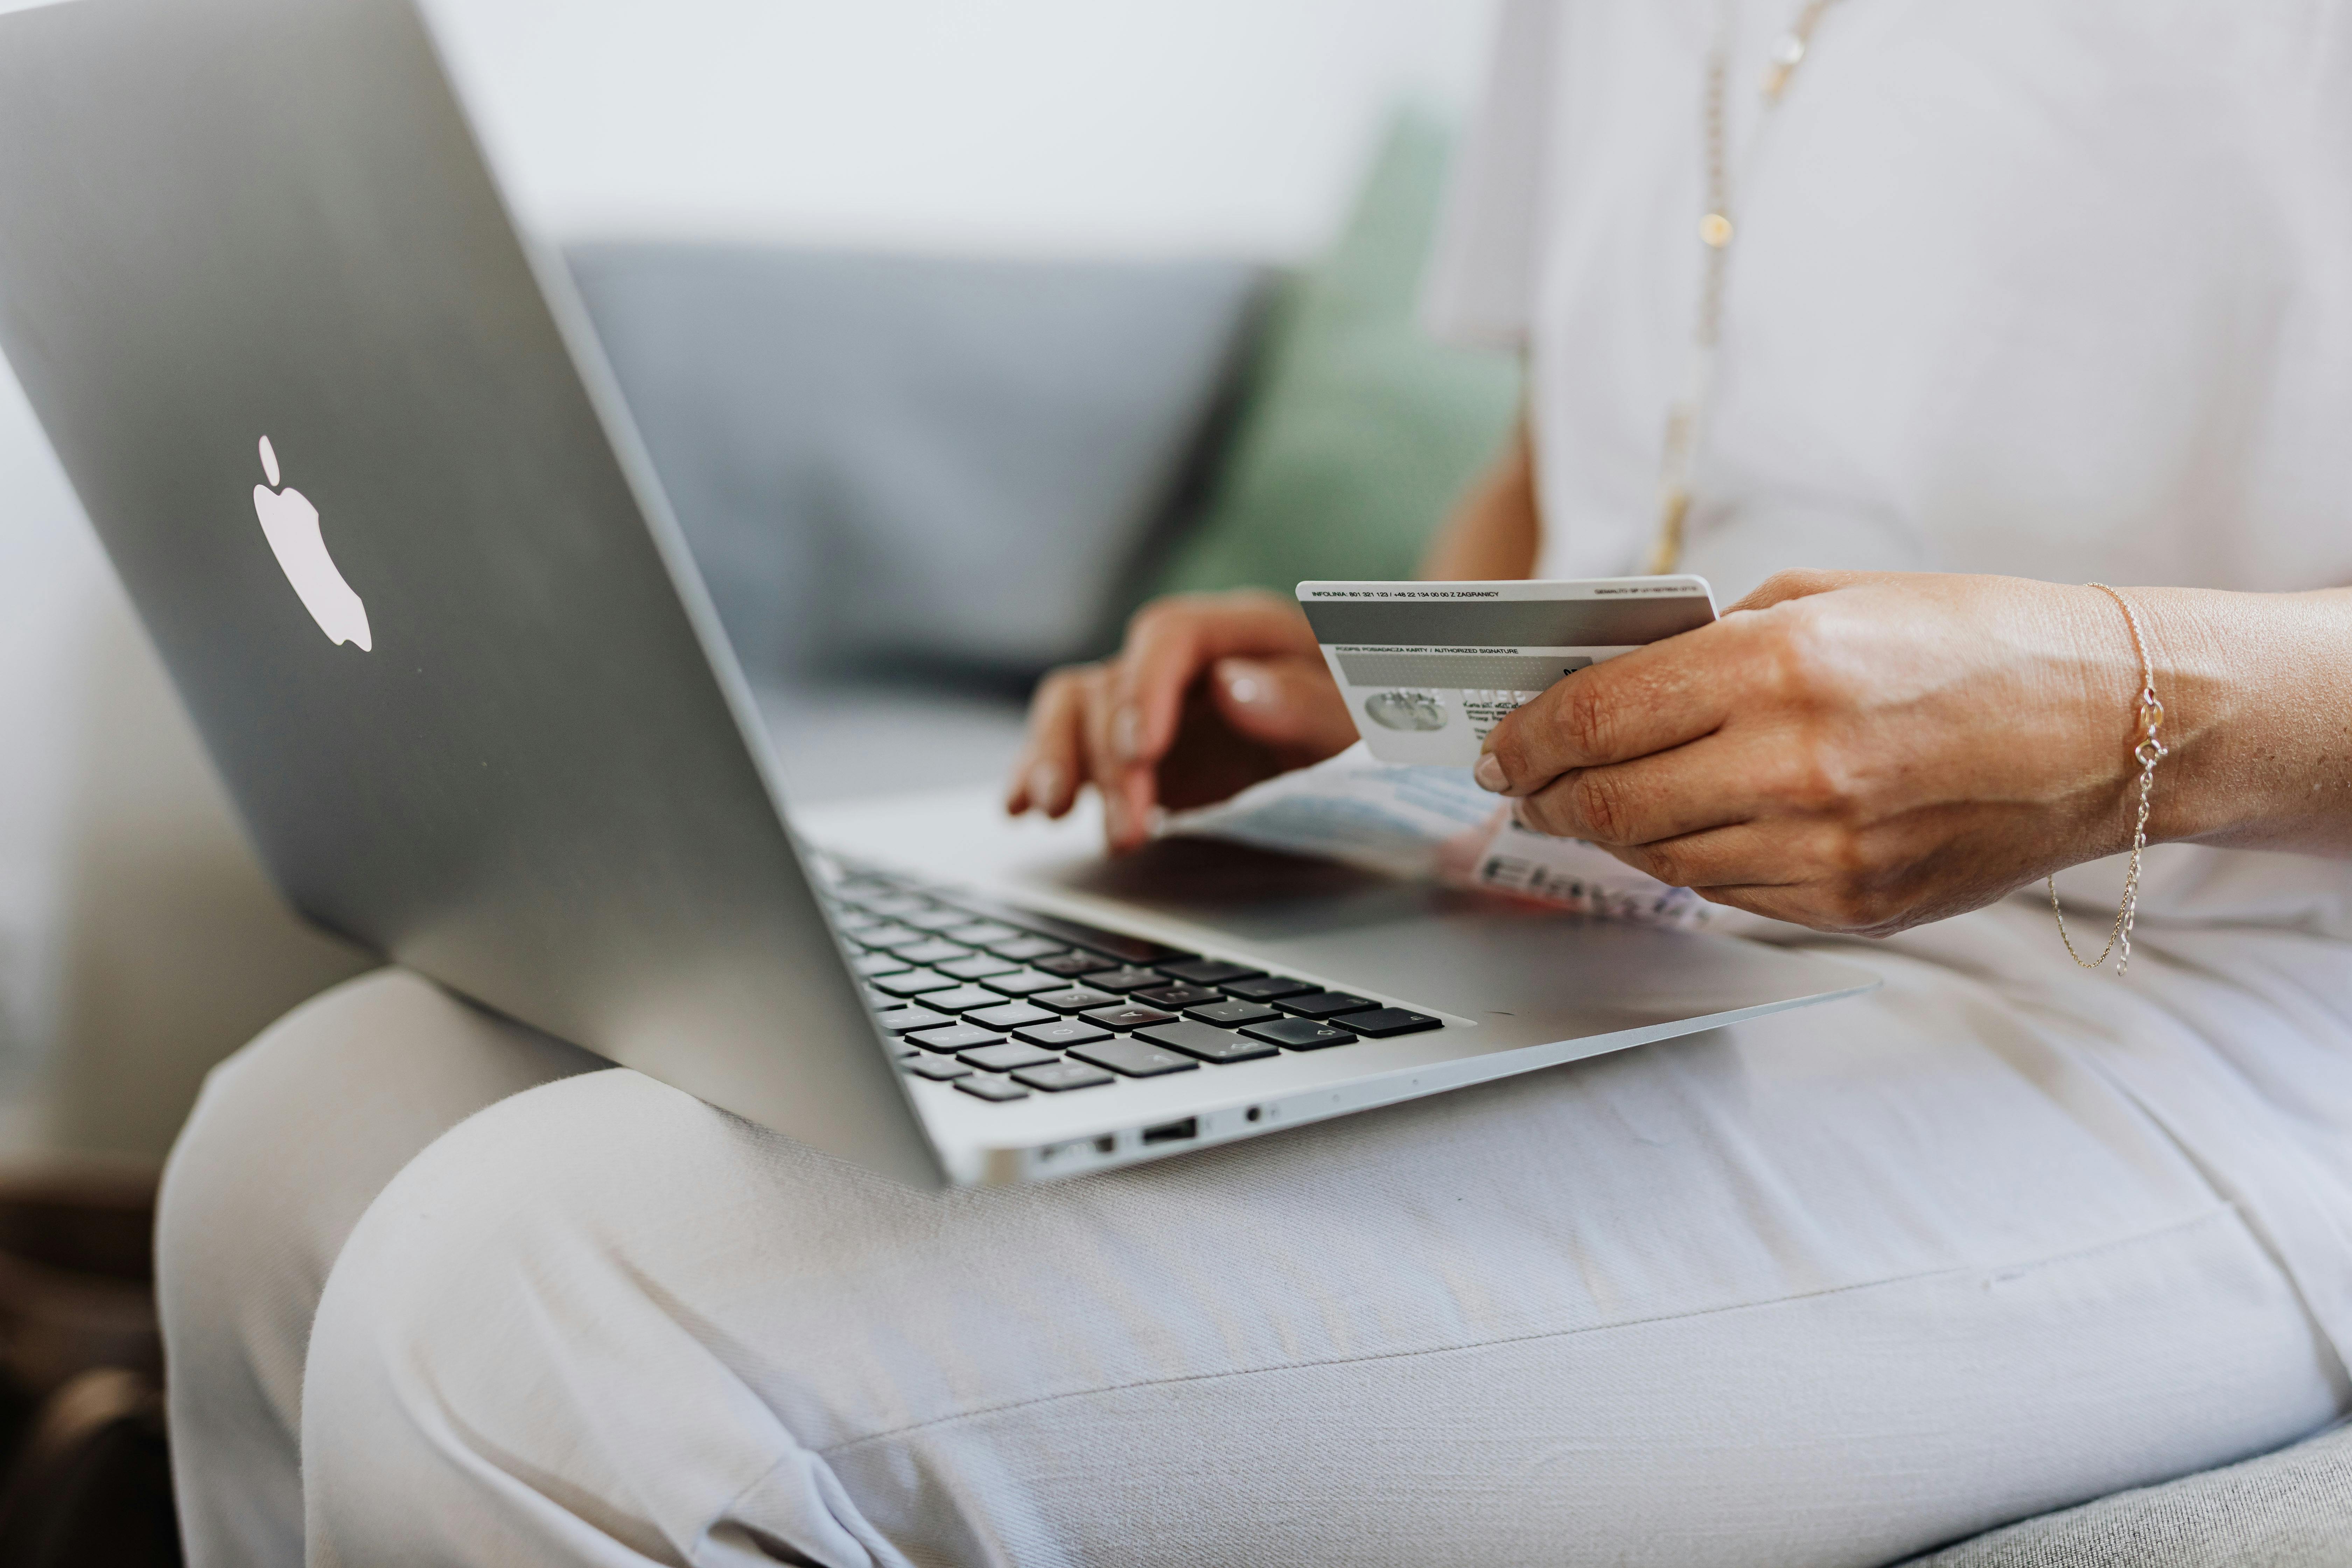 5 Clever Hacks to Save Money When Shopping Online